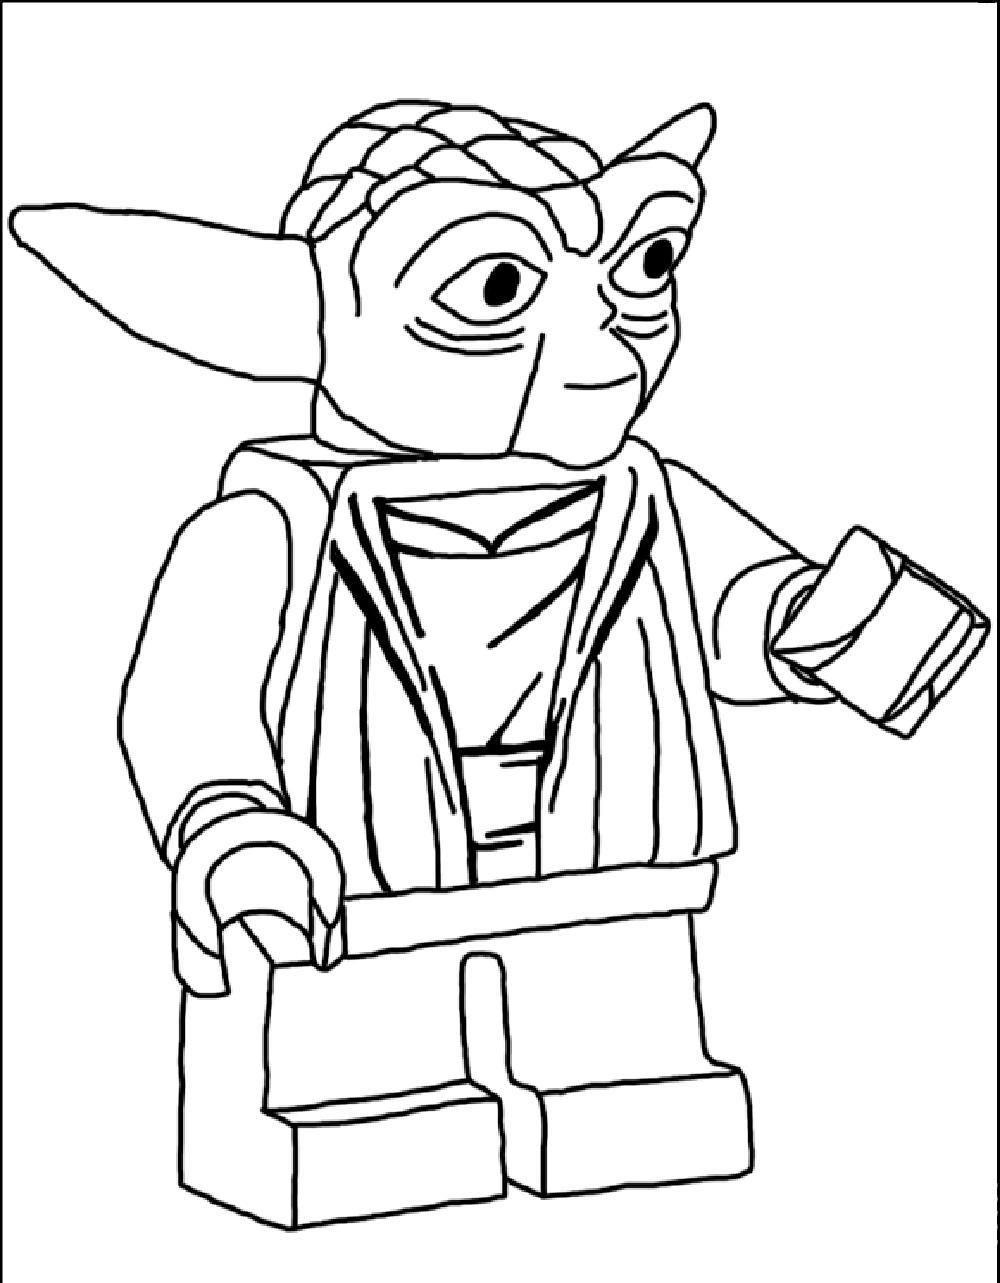 Lego Star Wars Printable Coloring Pages
 Lego Star Wars Coloring Sheets Coloring Home